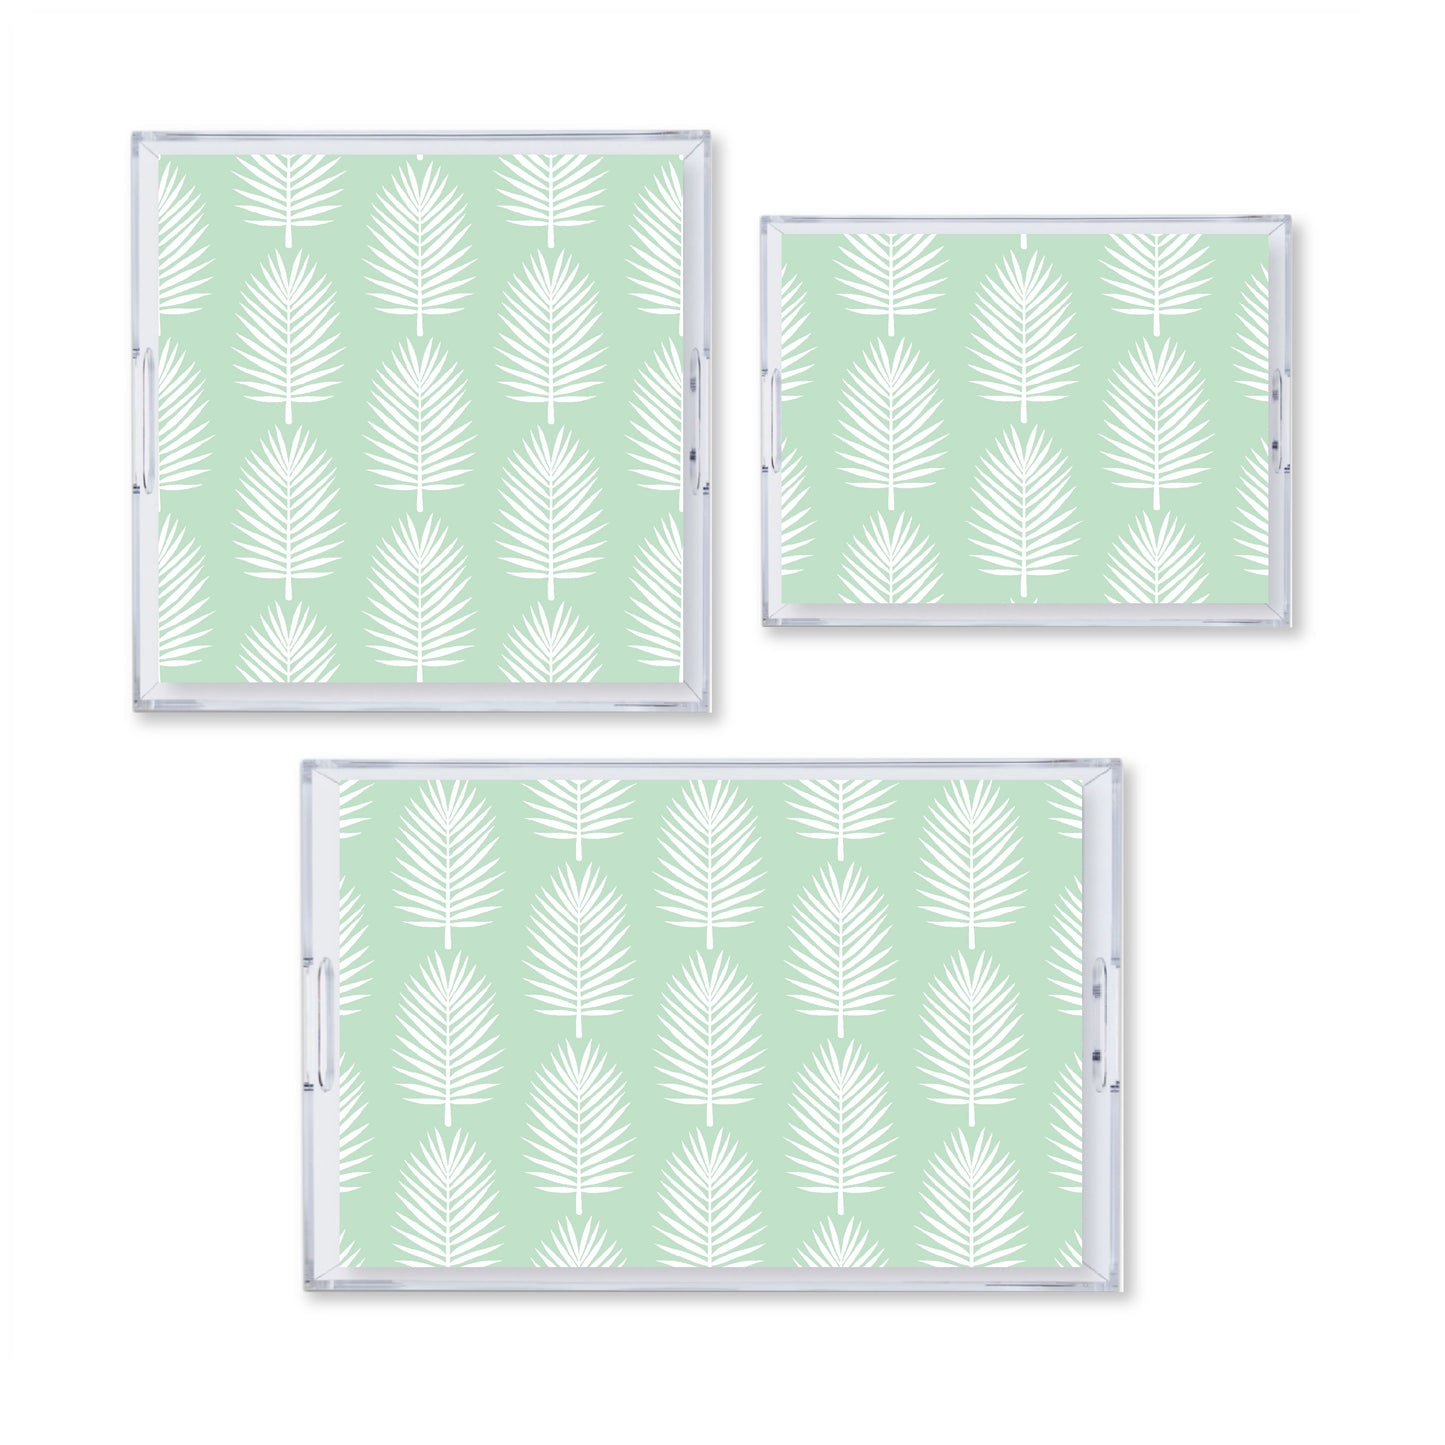 Cabbage Bay Reversible Acrylic Tray With Optional Monogram - Available In 3 Sizes and 3 Colors